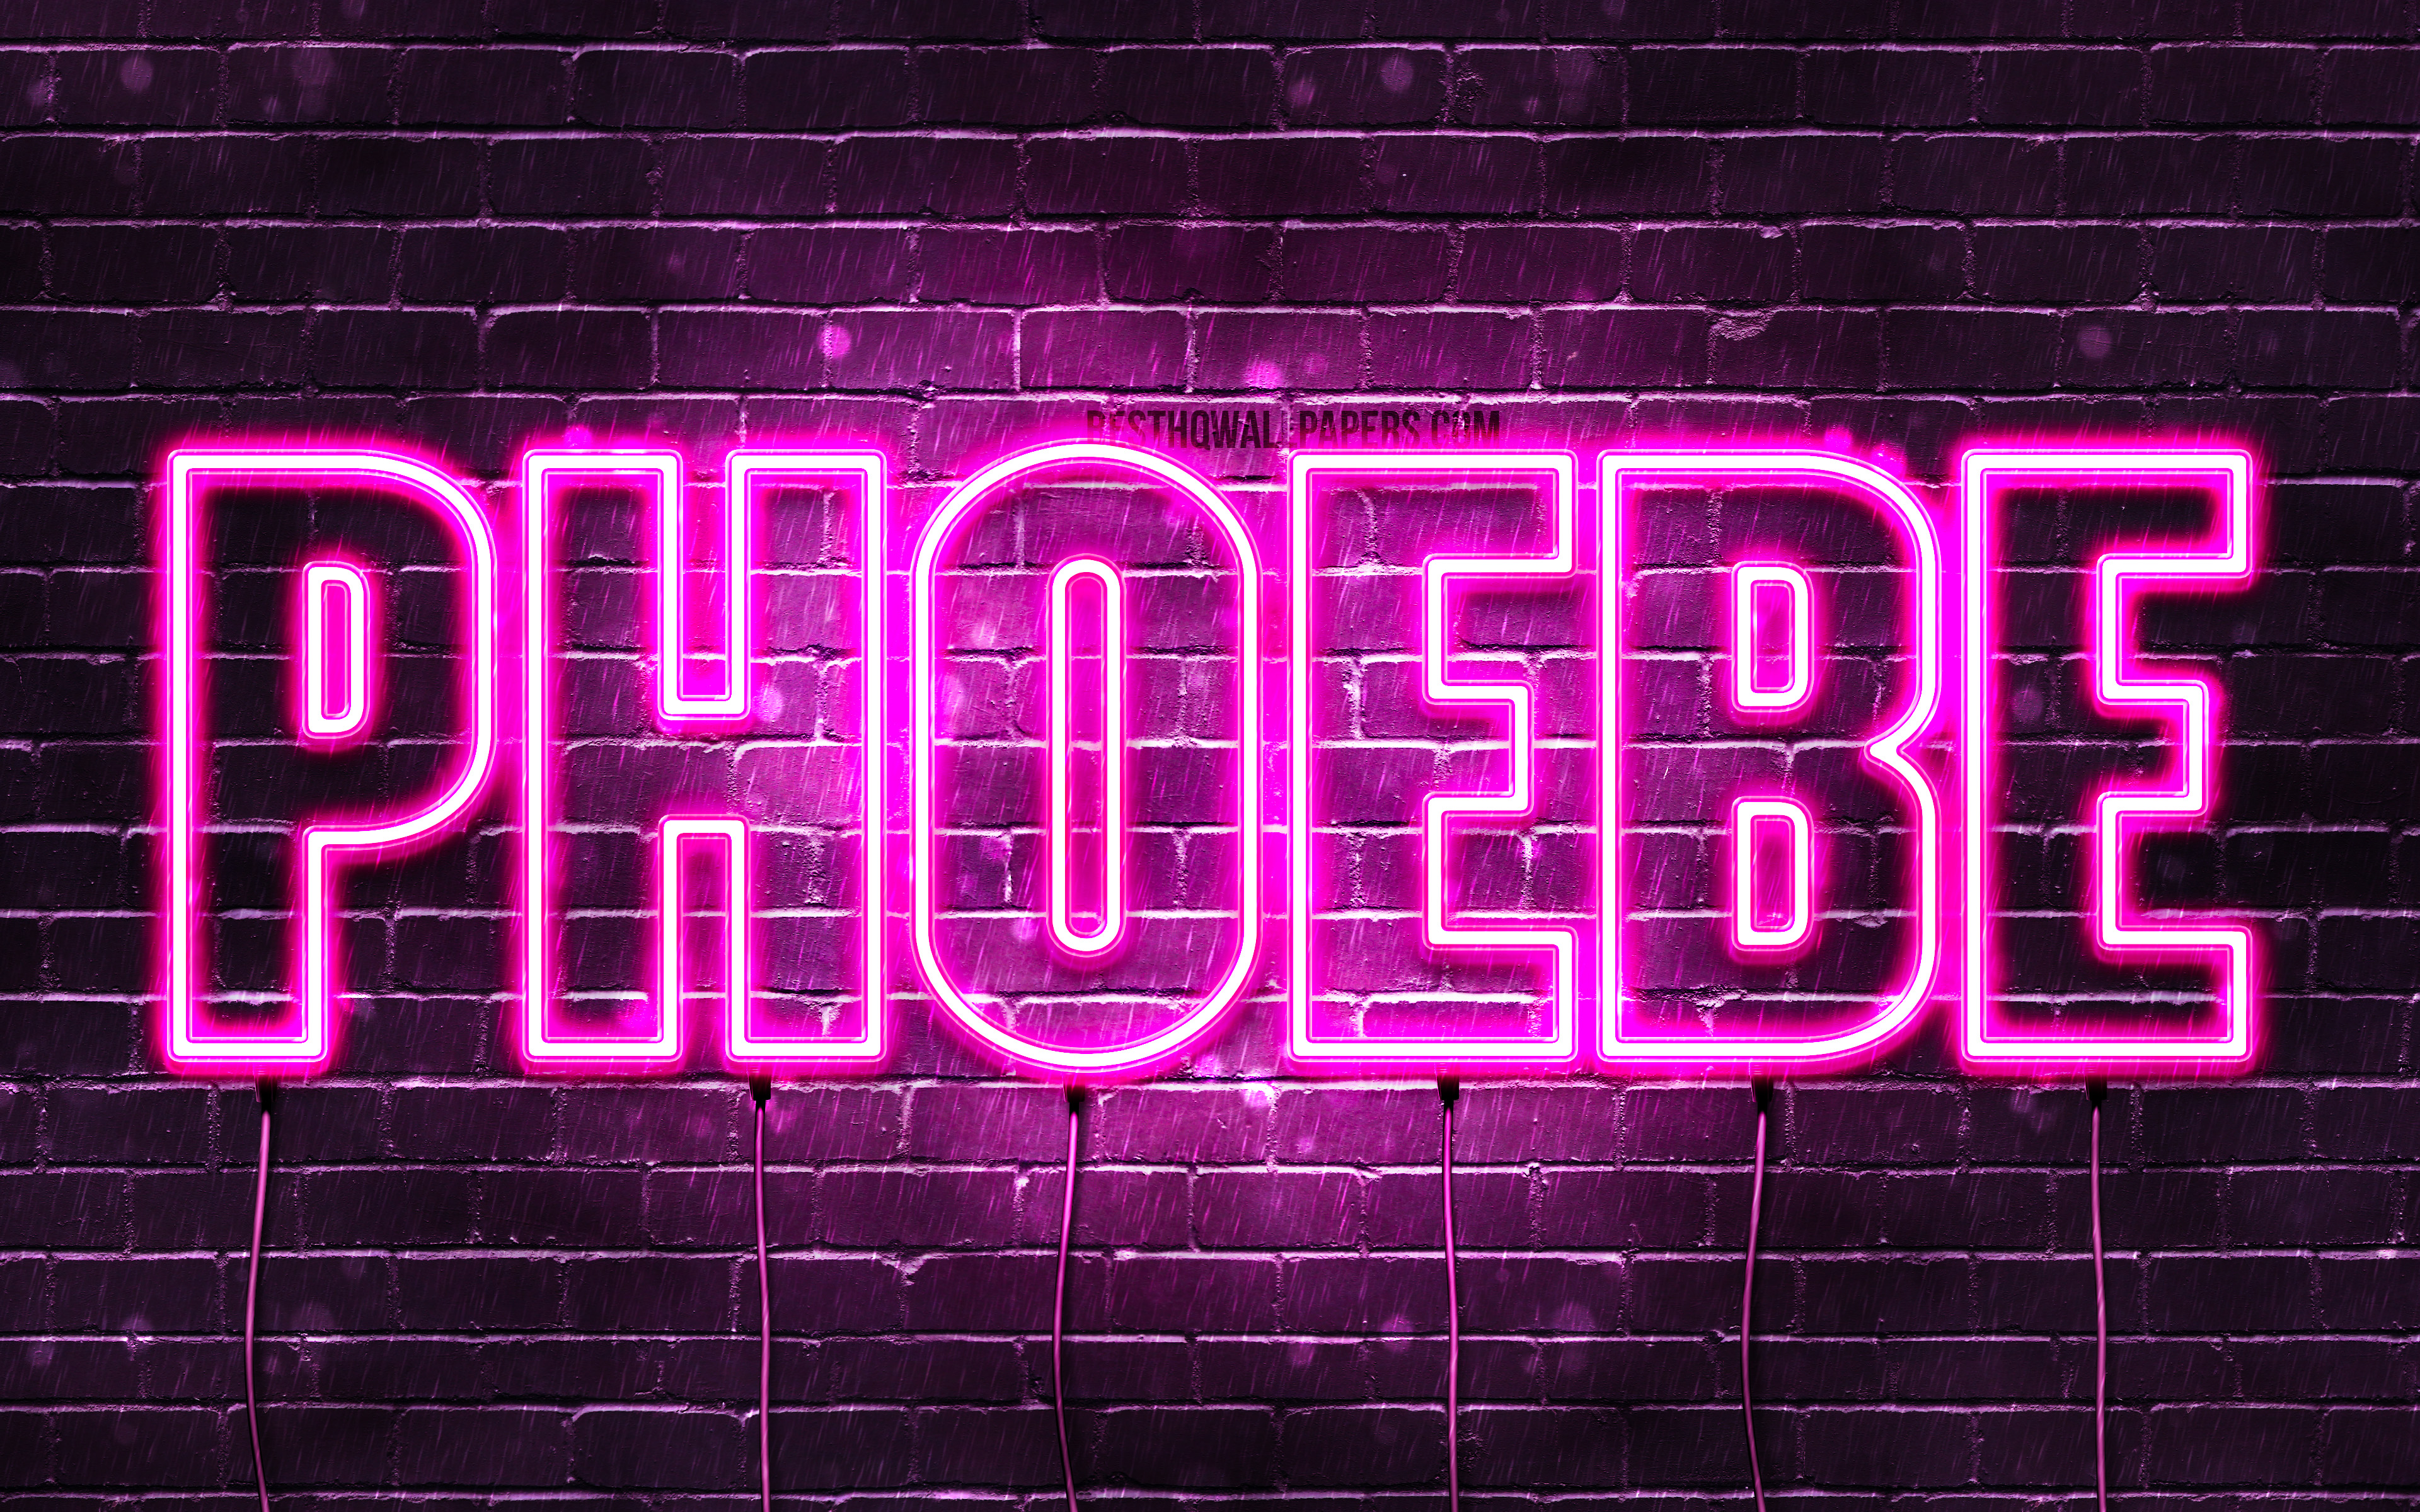 Download wallpapers Phoebe, 4k, wallpapers with names, female names